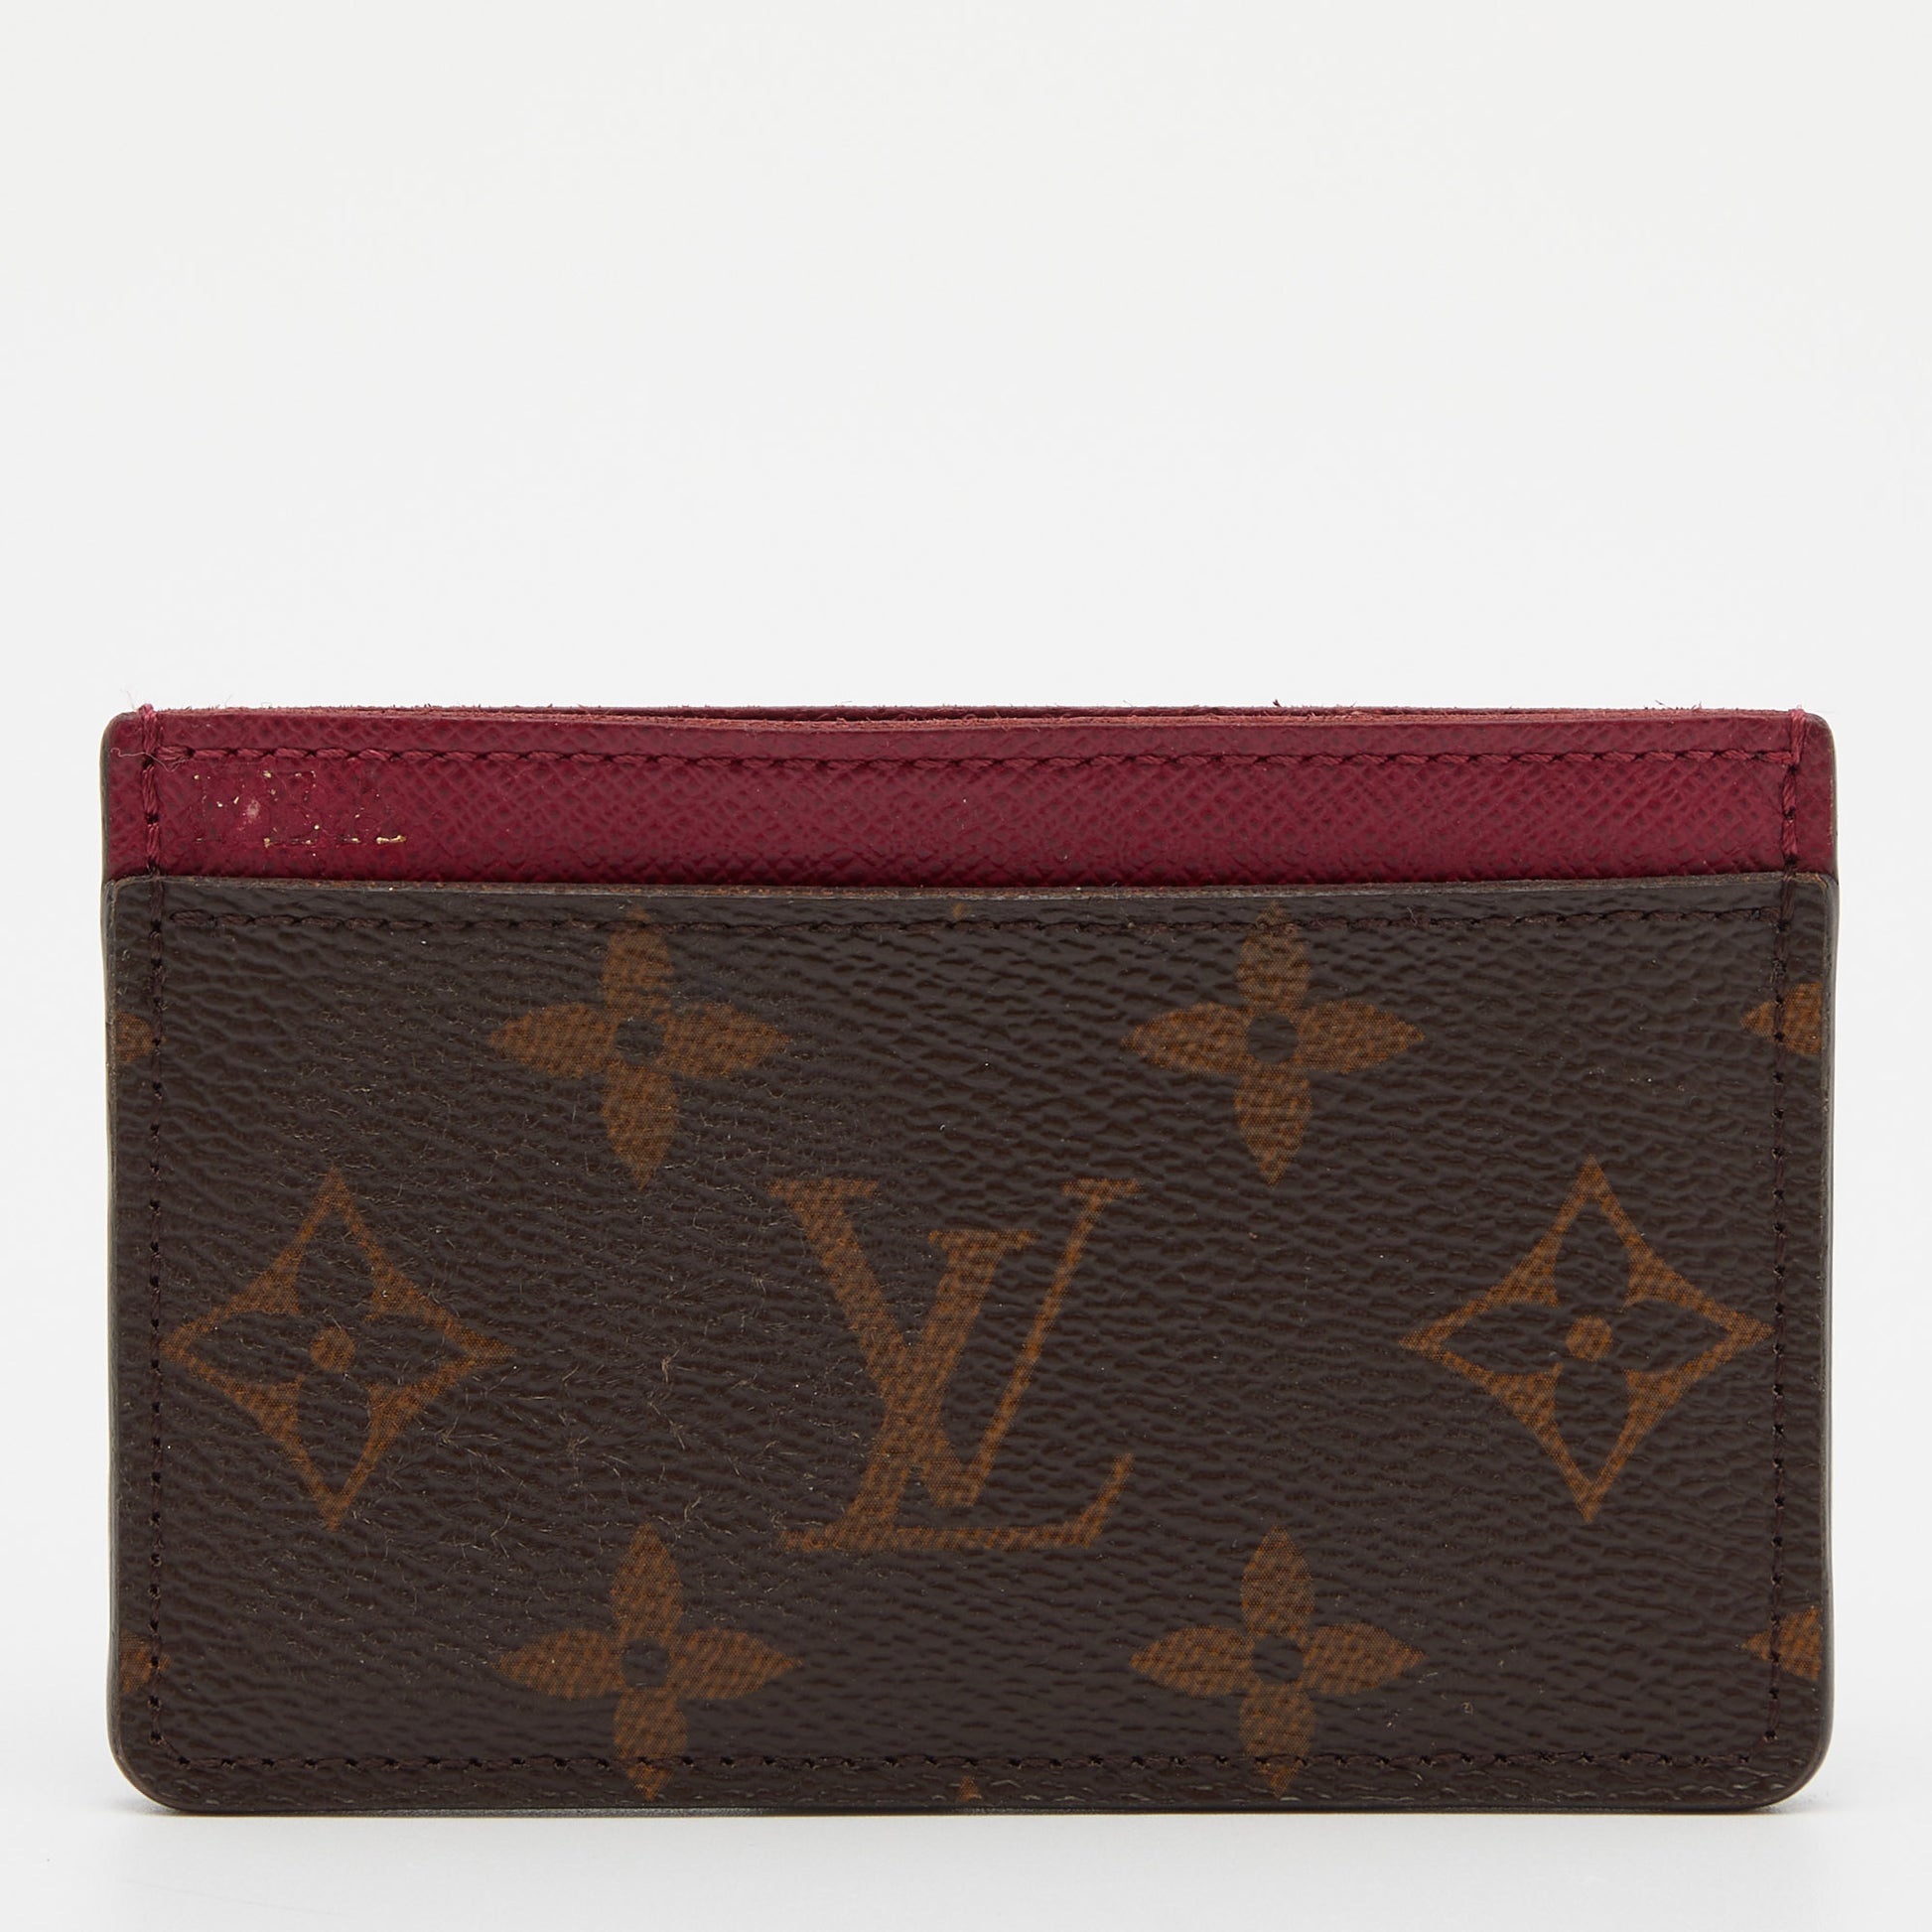 LV Guarantee Cards - Are they important? 